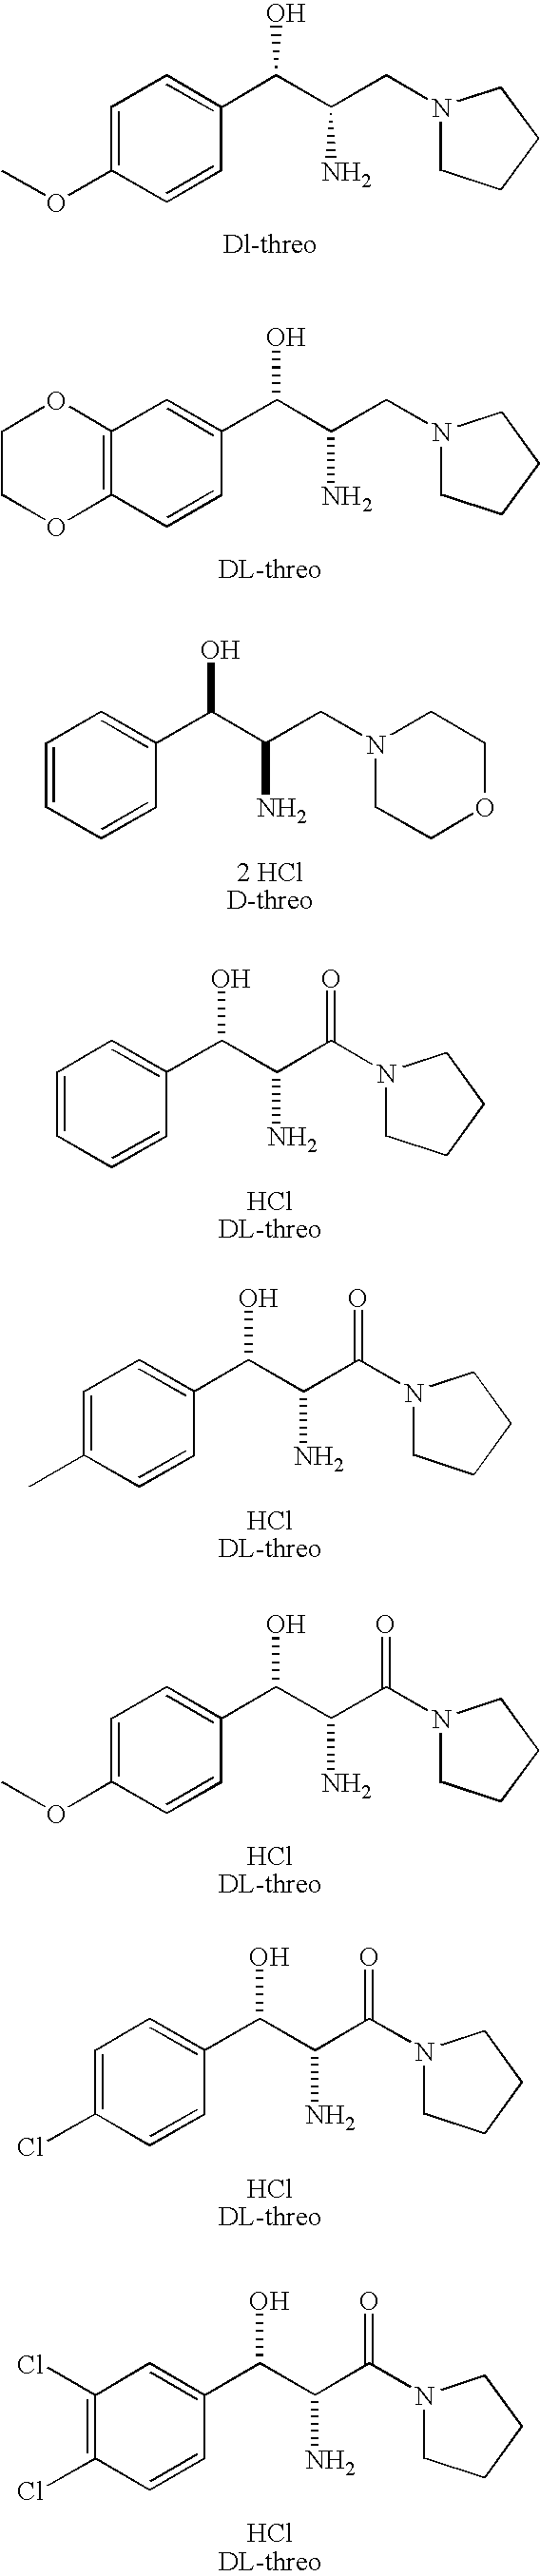 Methods of using as analgesics 1-benzyl-1-hydroxy-2,3-diamino-propyl amines, 3-benzyl-3-hydroxy-2-amino-propionic acid amides and related compounds